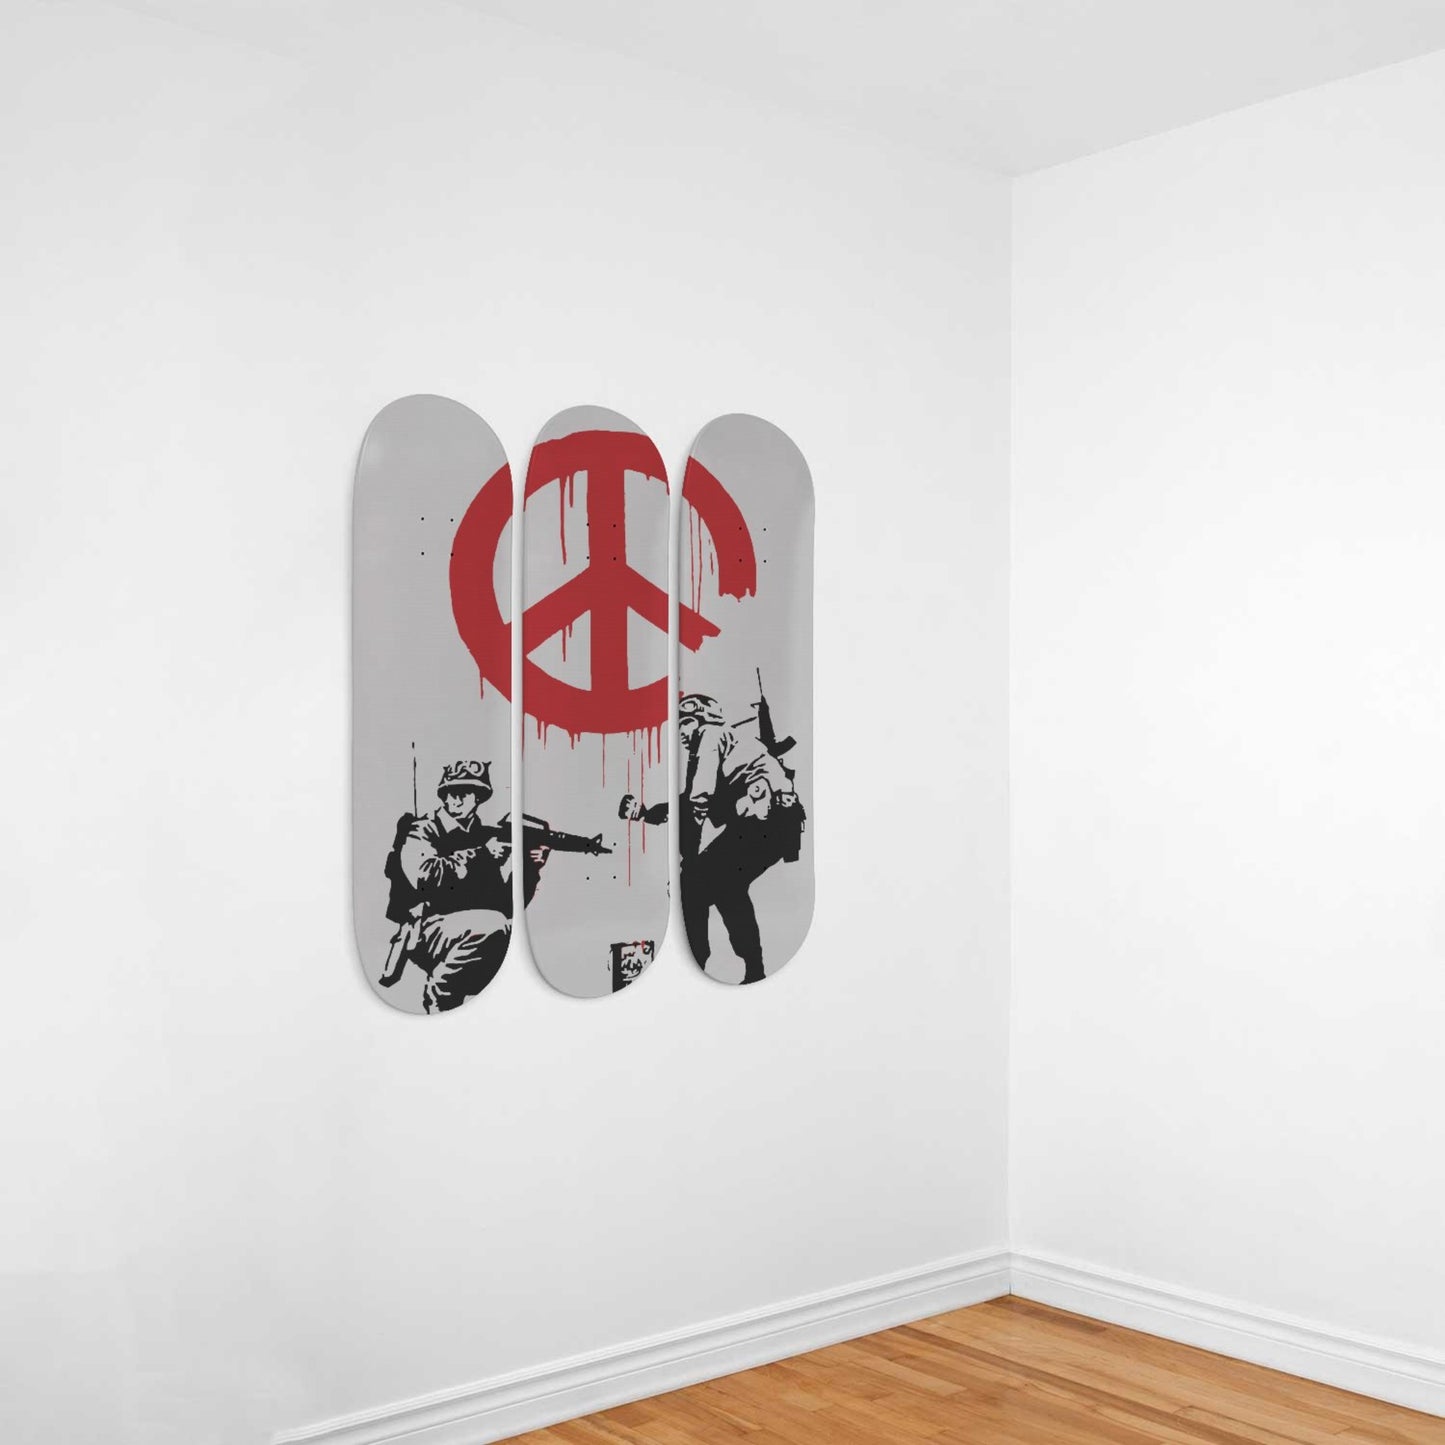 Peace Soldier 3 Set of Skateboard Deck Wall Art, Hanged Room Decoration, Custom Unique Gift